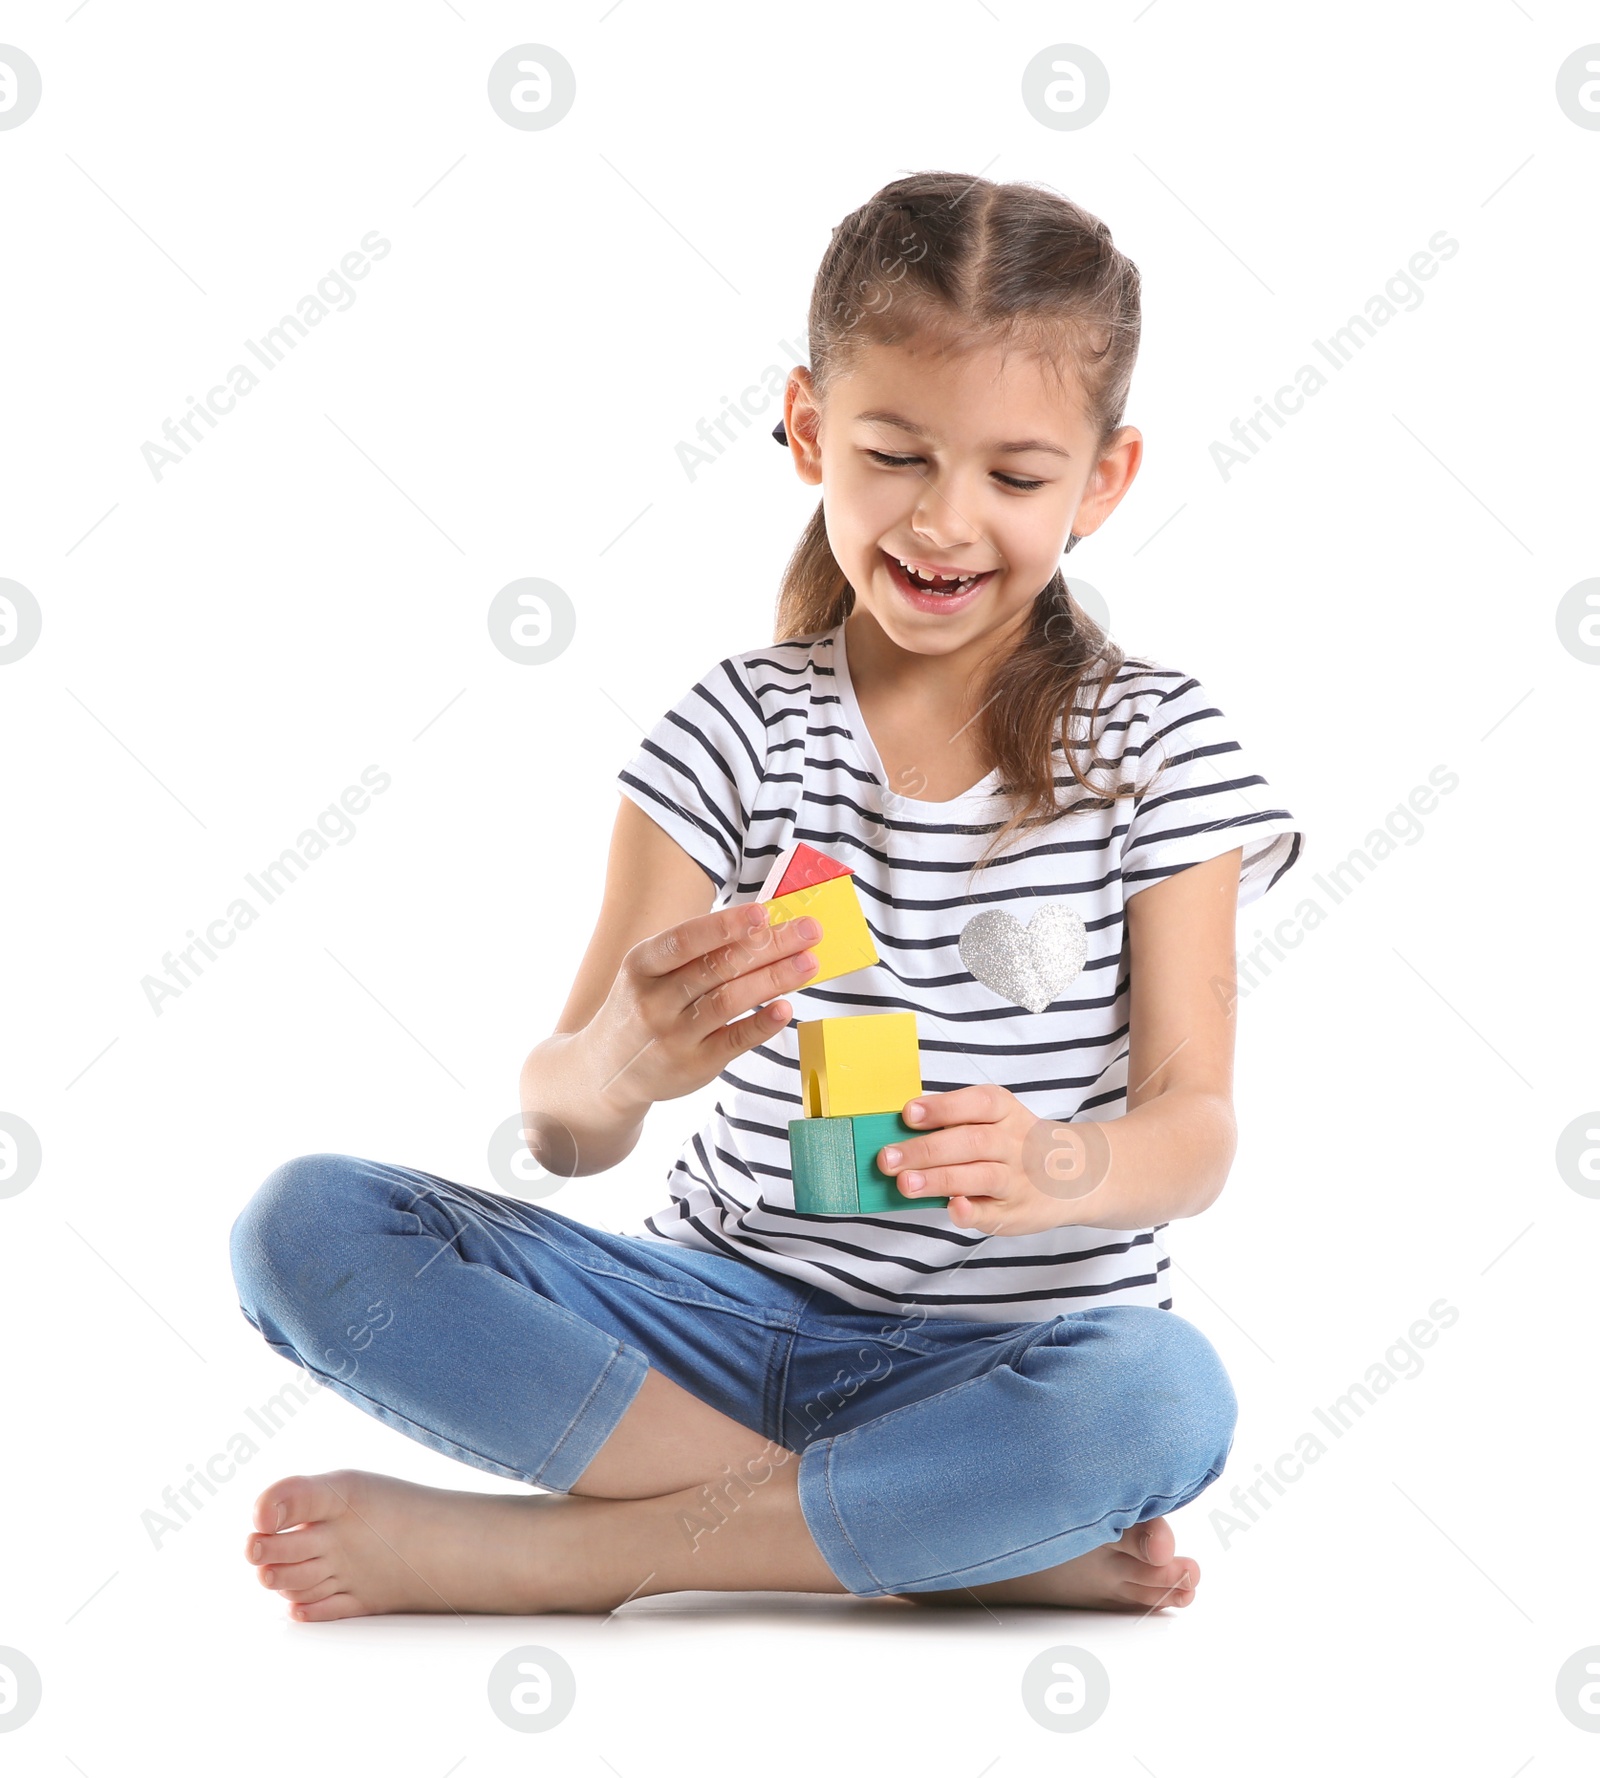 Photo of Cute child playing with colorful blocks on white background